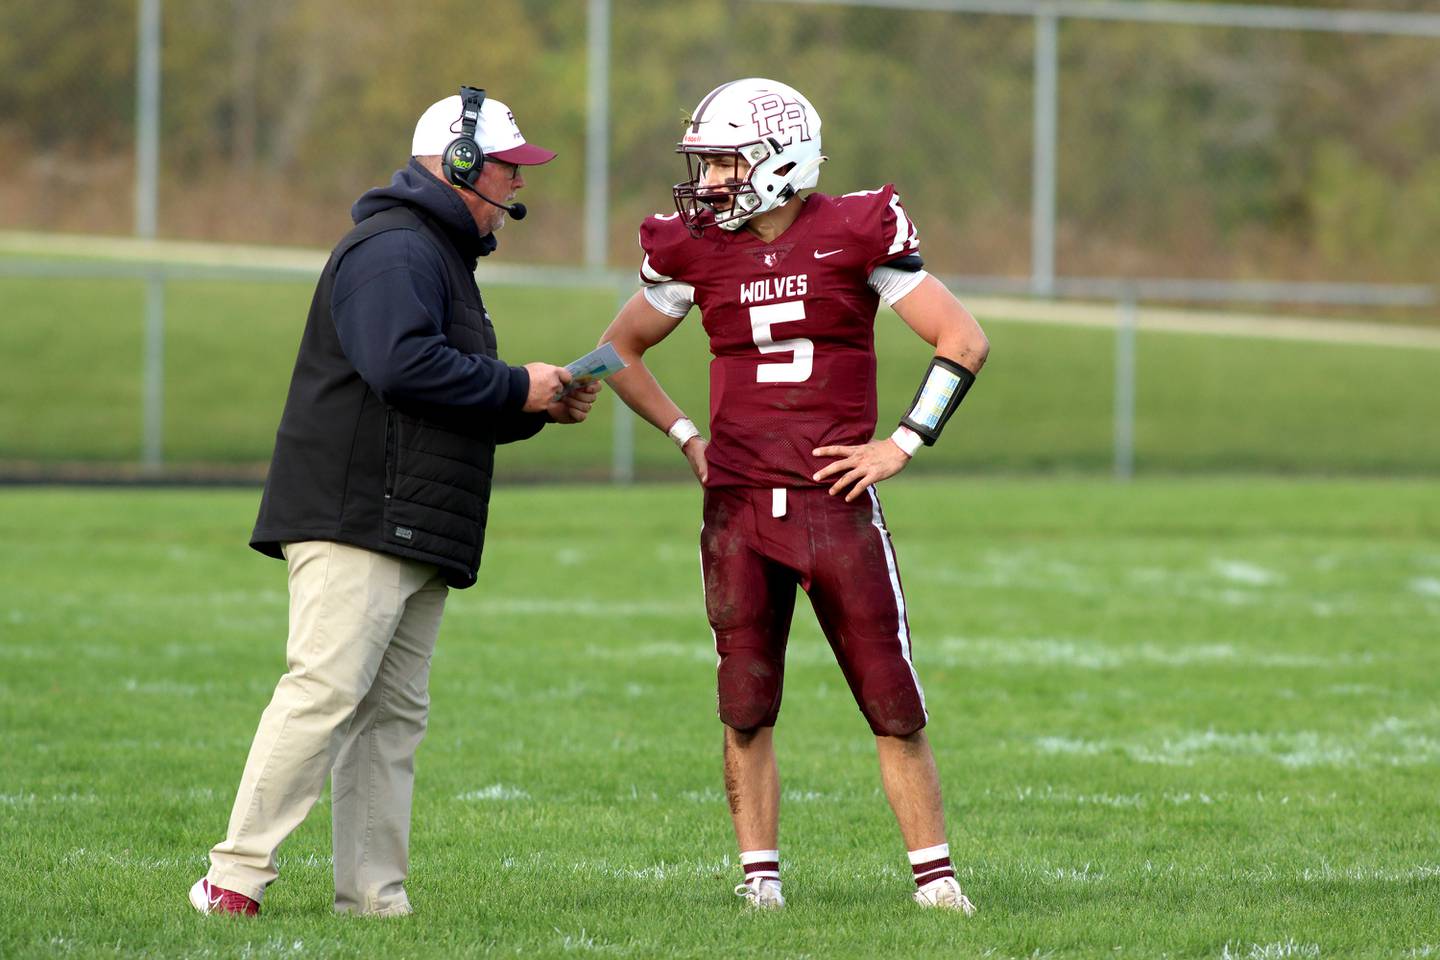 Prairie Ridge’s Head Coach Chris Schremp consults with his quarterback Joey Vanderwiel against Nazareth in first-round Class 5A playoff football action at Crystal Lake Saturday.